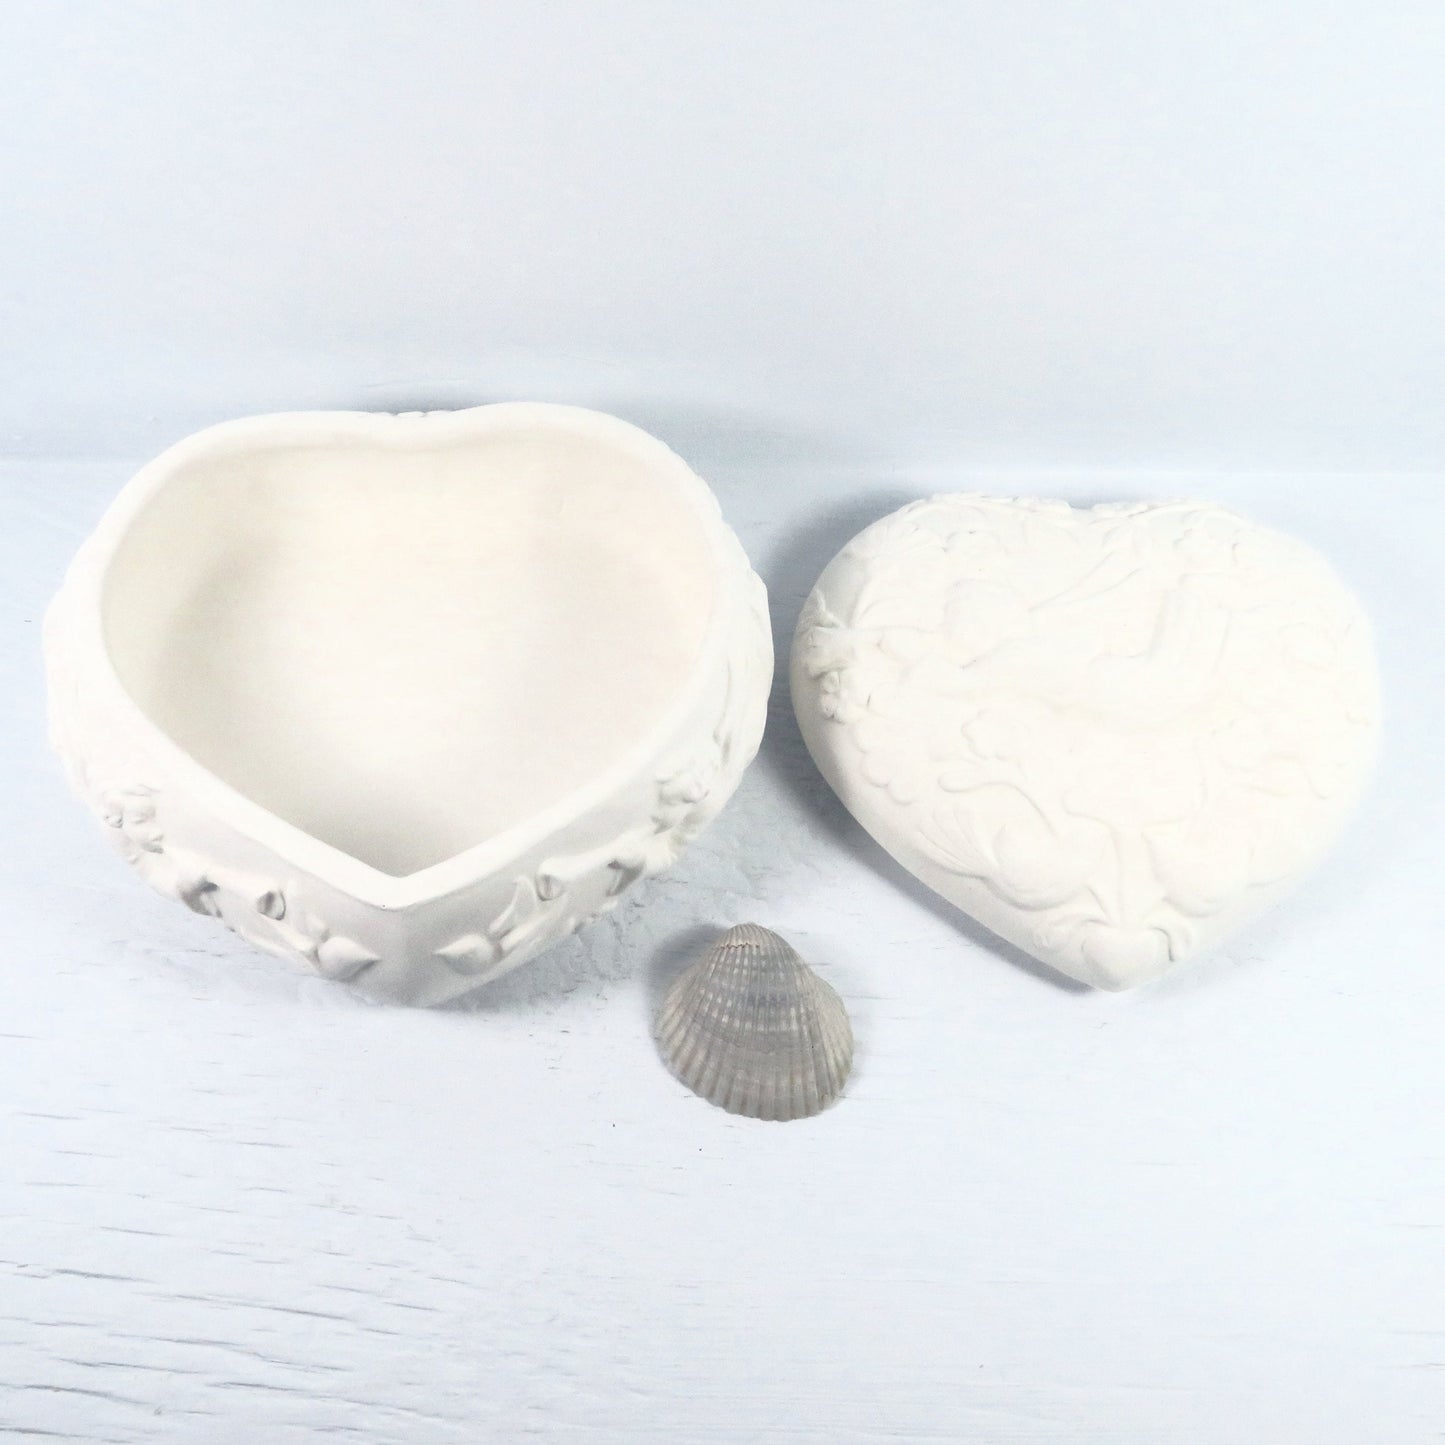 Handmade Unpainted Ceramic Angel Heart Shaped Covered Trinket Dish / Paint It Yourself Candy Dish and Lid / Ready To Paint / Angel Decor